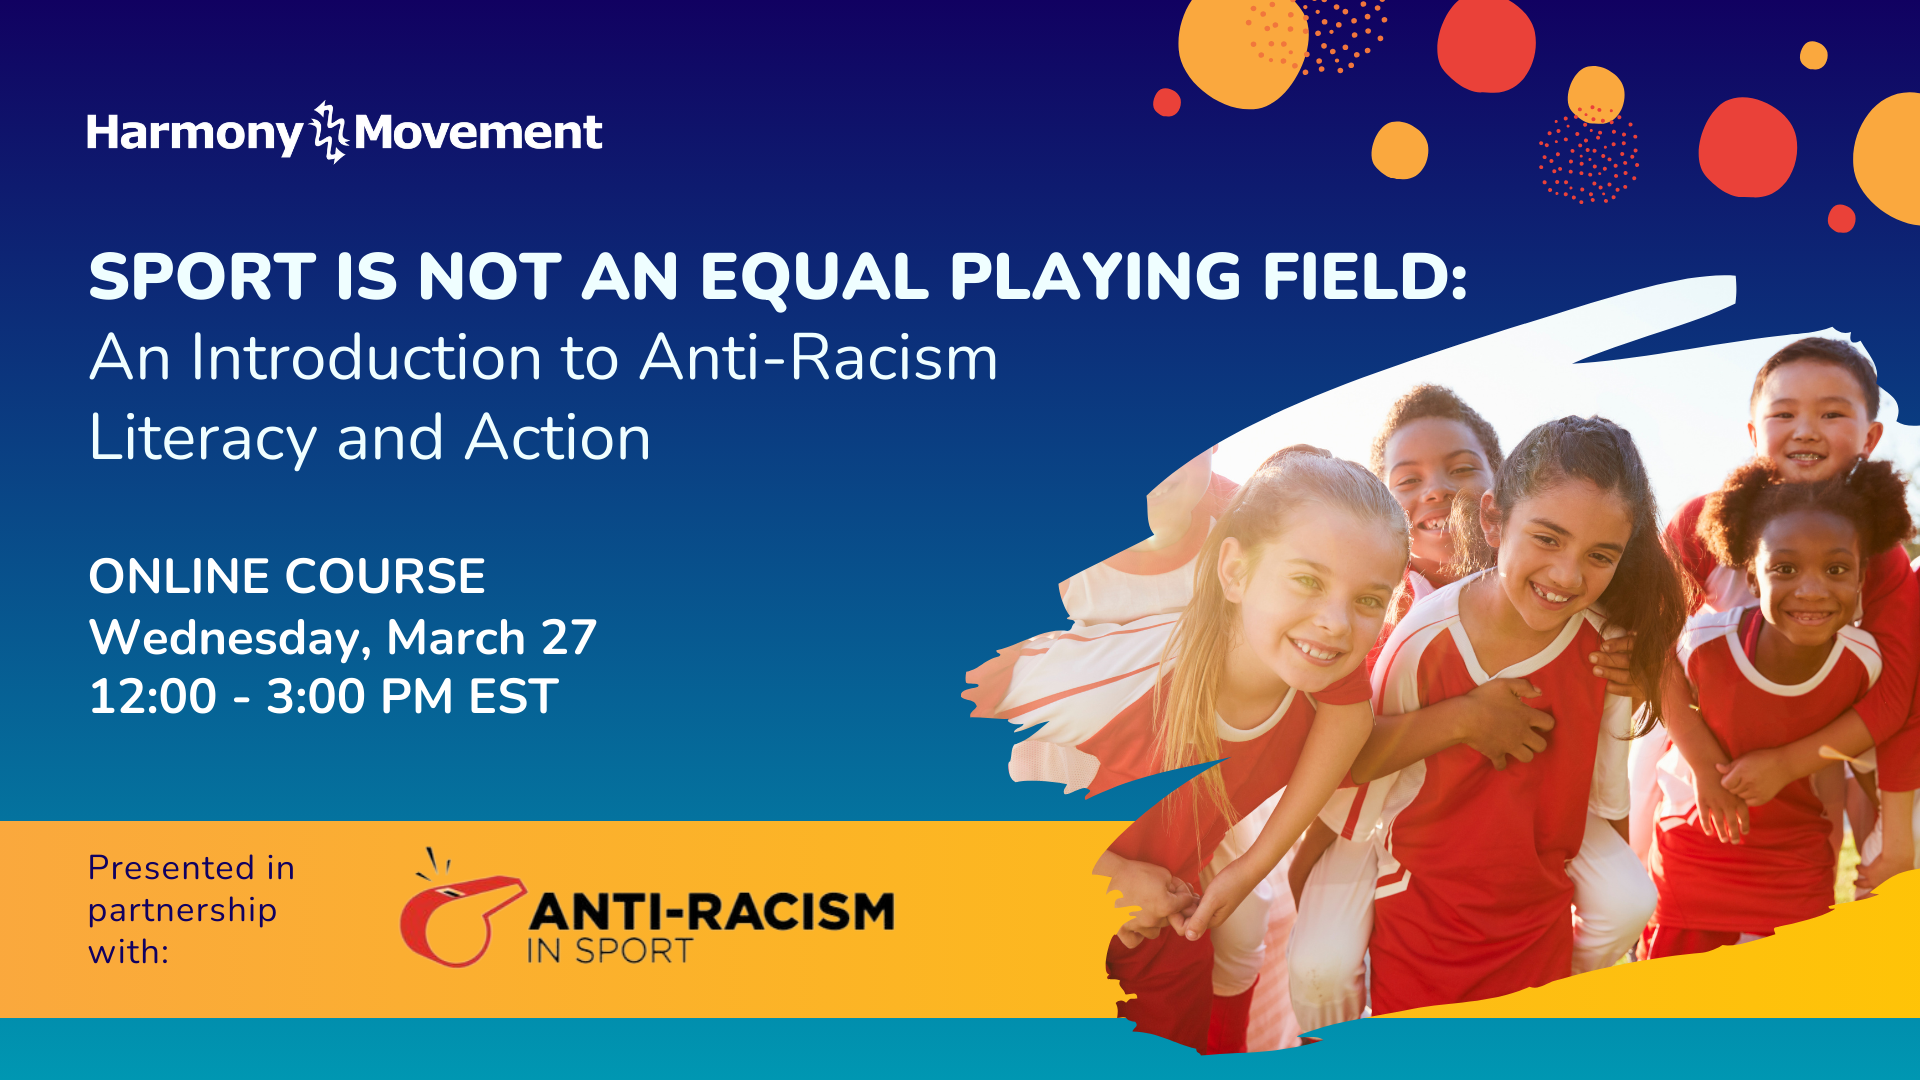 Sport is not an Equal Playing field: An Introduction - Anti-Racism Literacy and Action Online Course Wednesday, March 27 112:00-3:00 PM EST Presented in partnership with: Anti-Racism in Sport